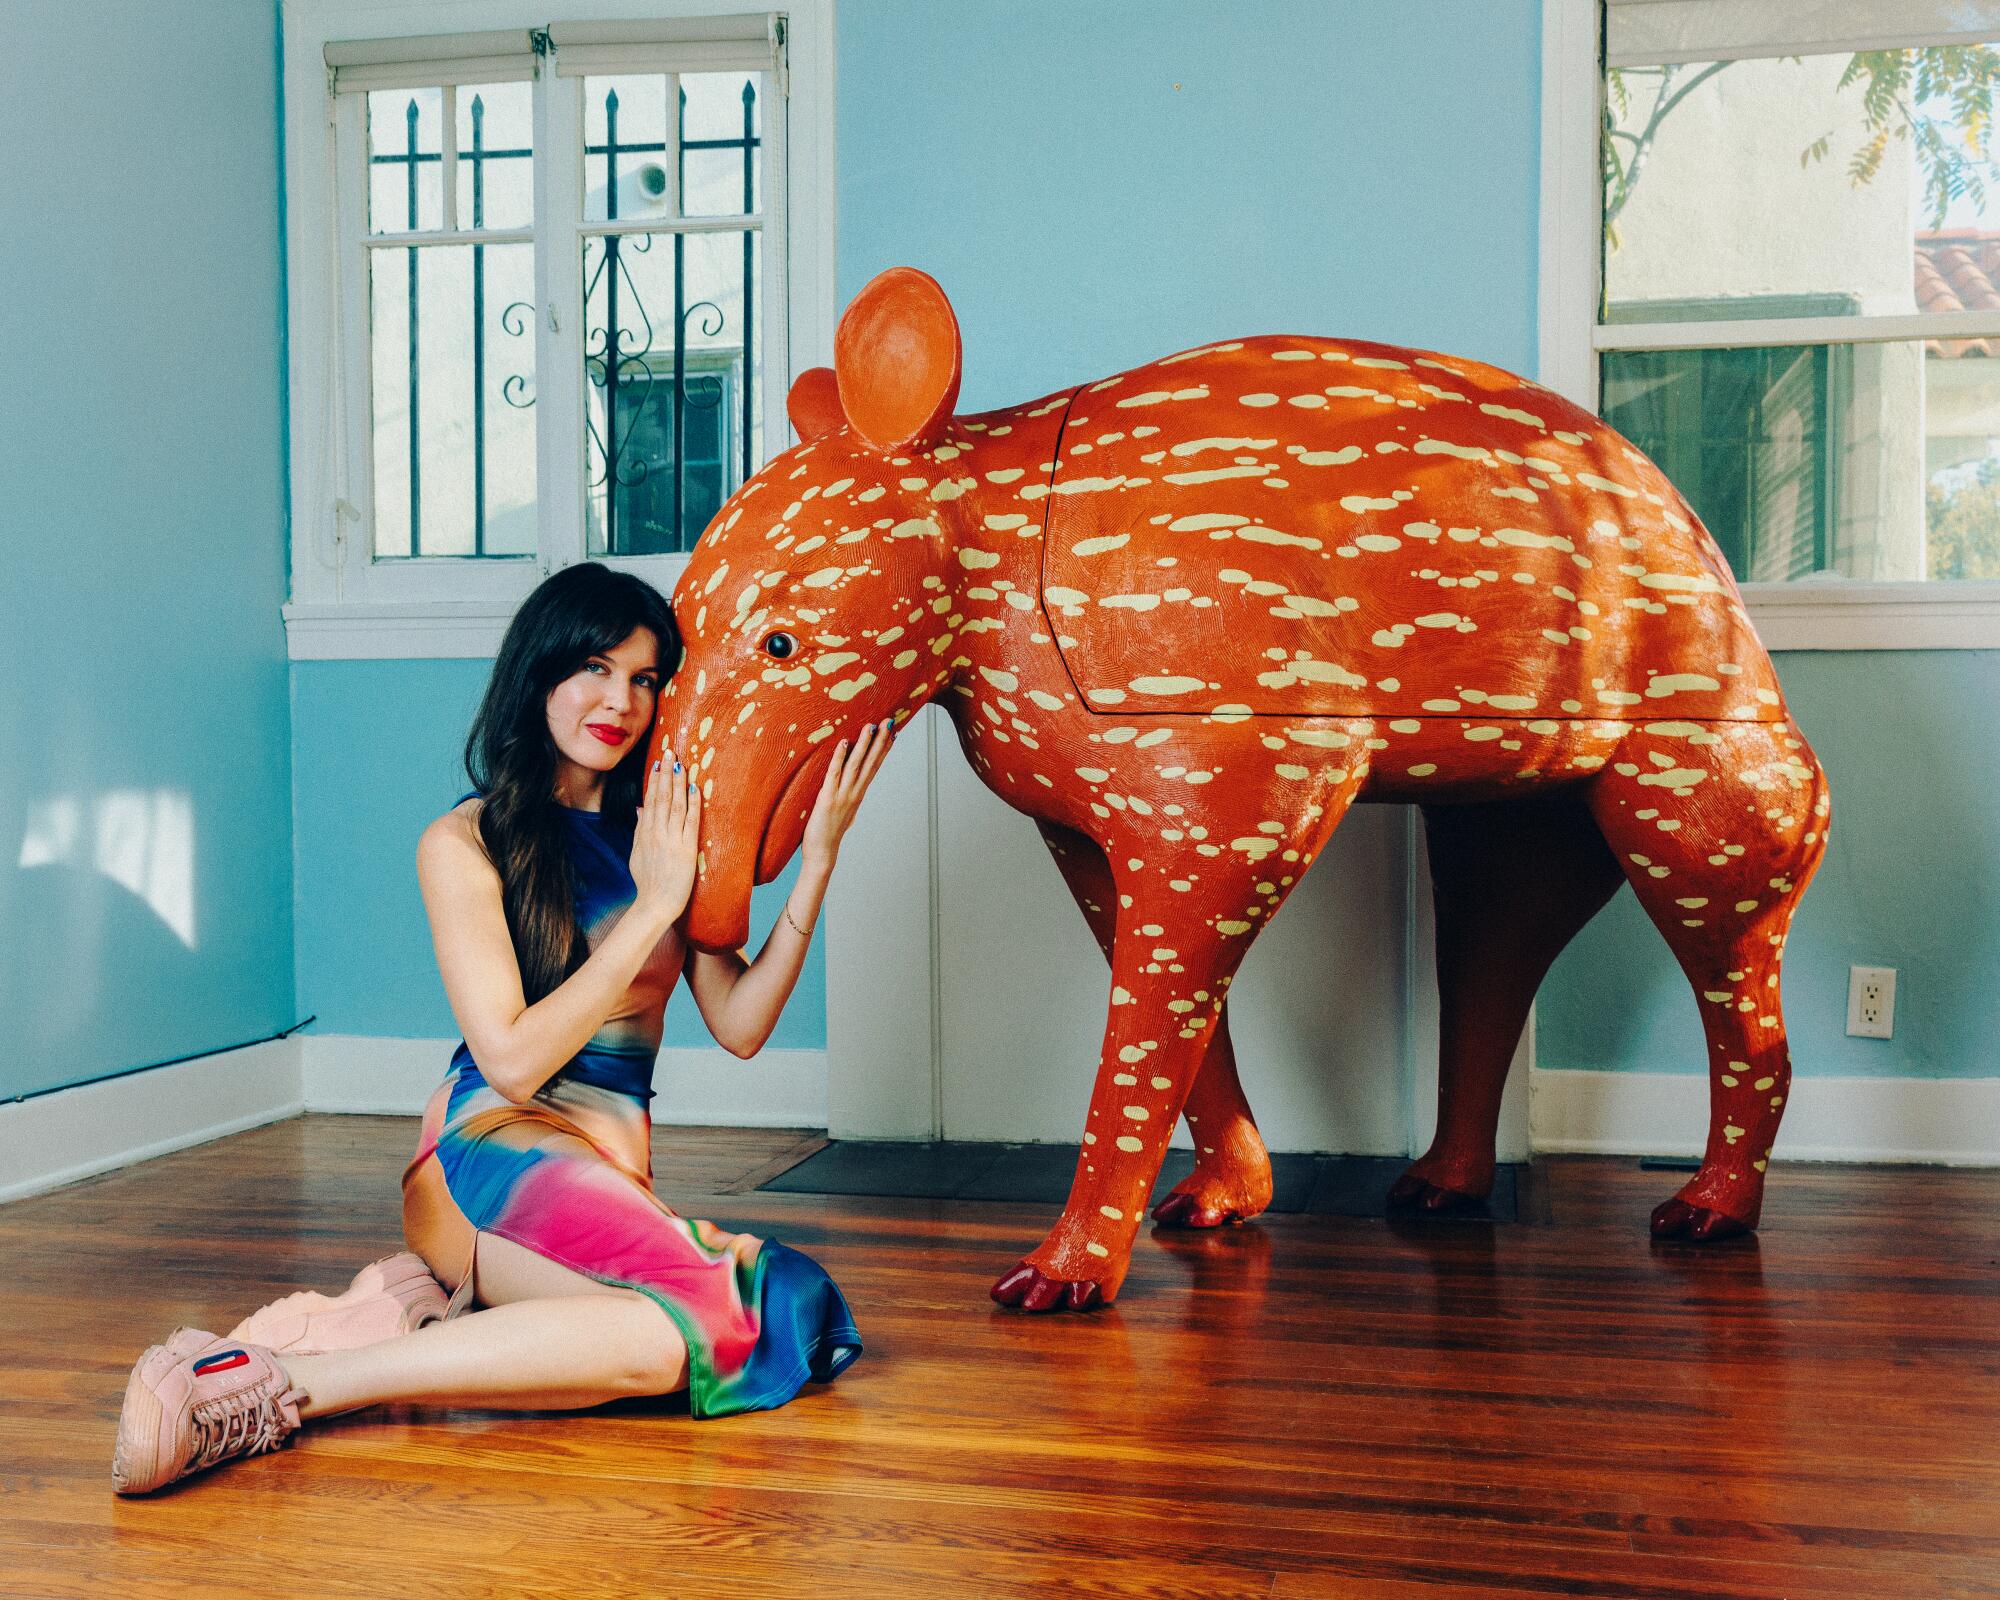 A portrait of a woman with dark hair and colorful dress, sitting on the floor nose to nose with a tapir sculpture.